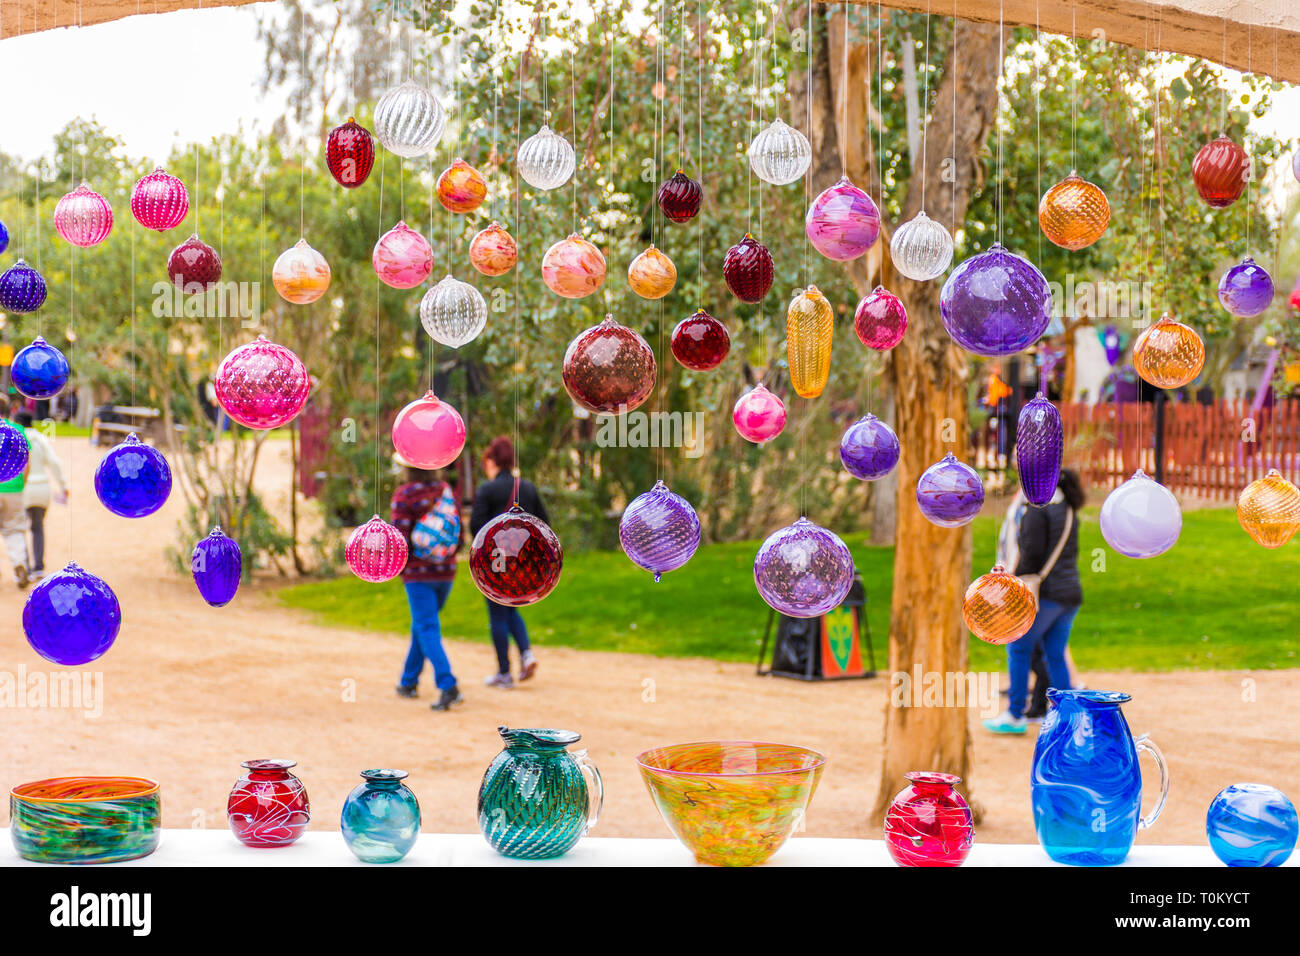 set of many colorful glass ball lights together or place them separately around an indoor space to give your home decor a warm, magical feeling. Stock Photo